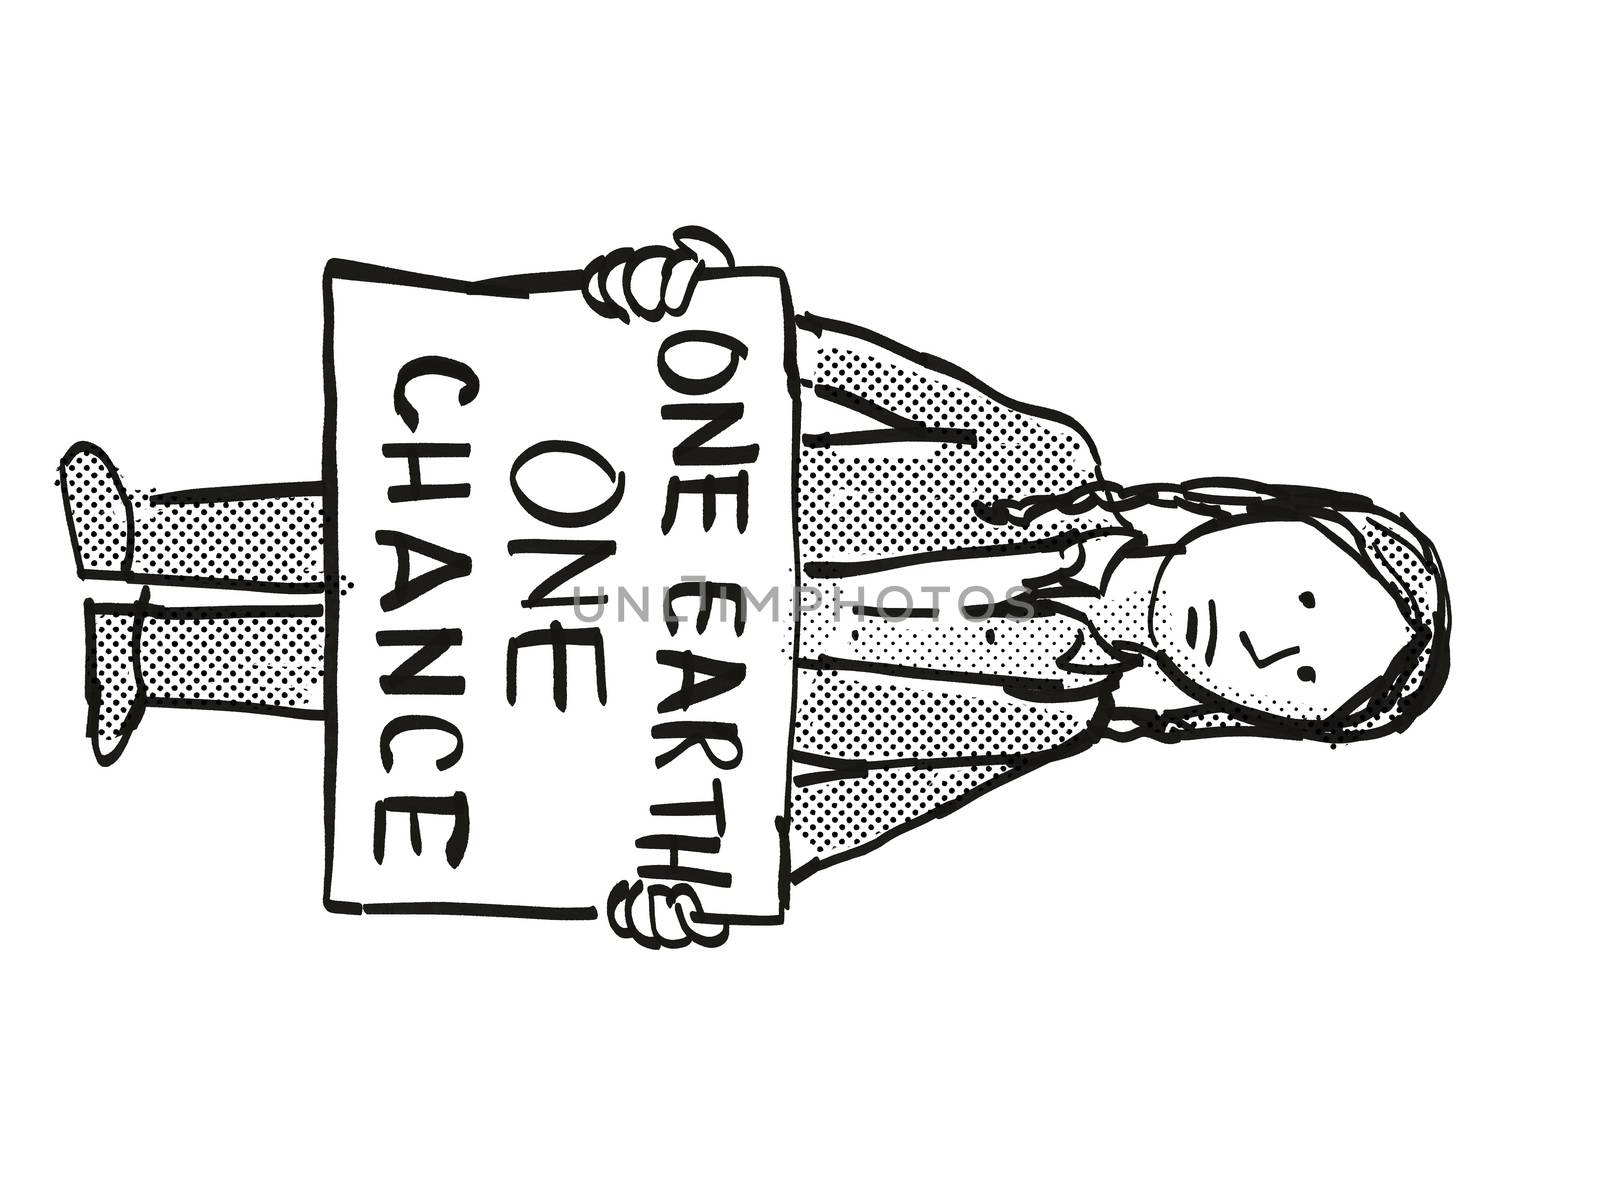 Cartoon style illustration of a young student or child with placard, One Earth One Chance protesting on Climate Change done in black and white on isolated background.